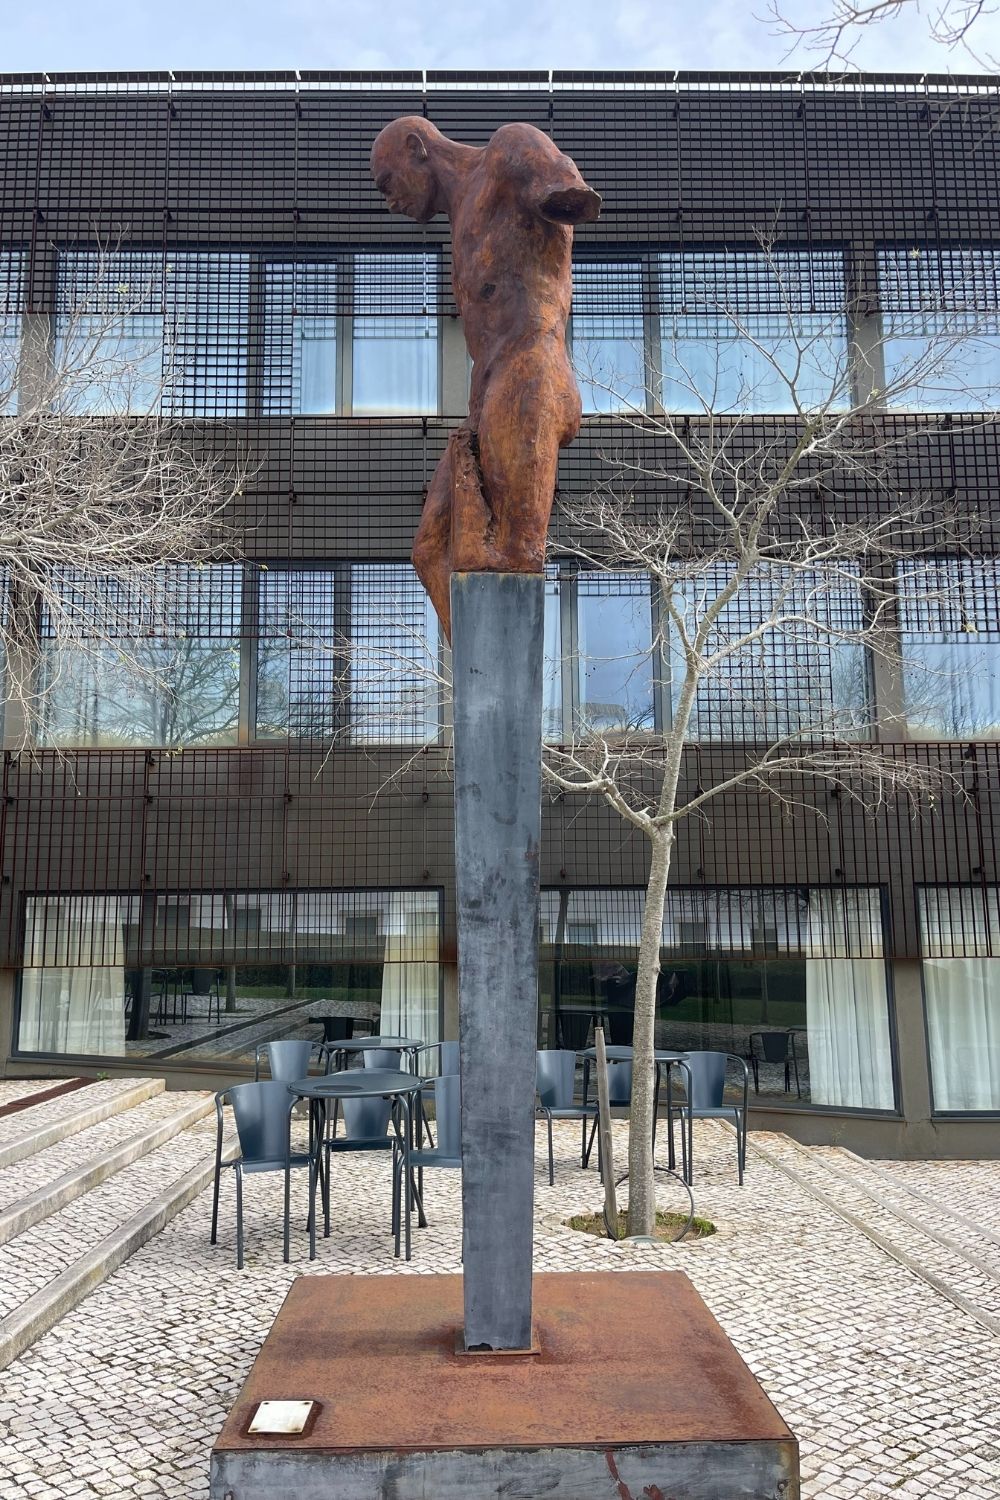 A rust-colored sculpture of a figure atop a tall steel pillar is placed before a modern building with a grid facade. The sculpture appears contemplative or in mourning, adding a touch of emotion to the otherwise urban and architectural environment.